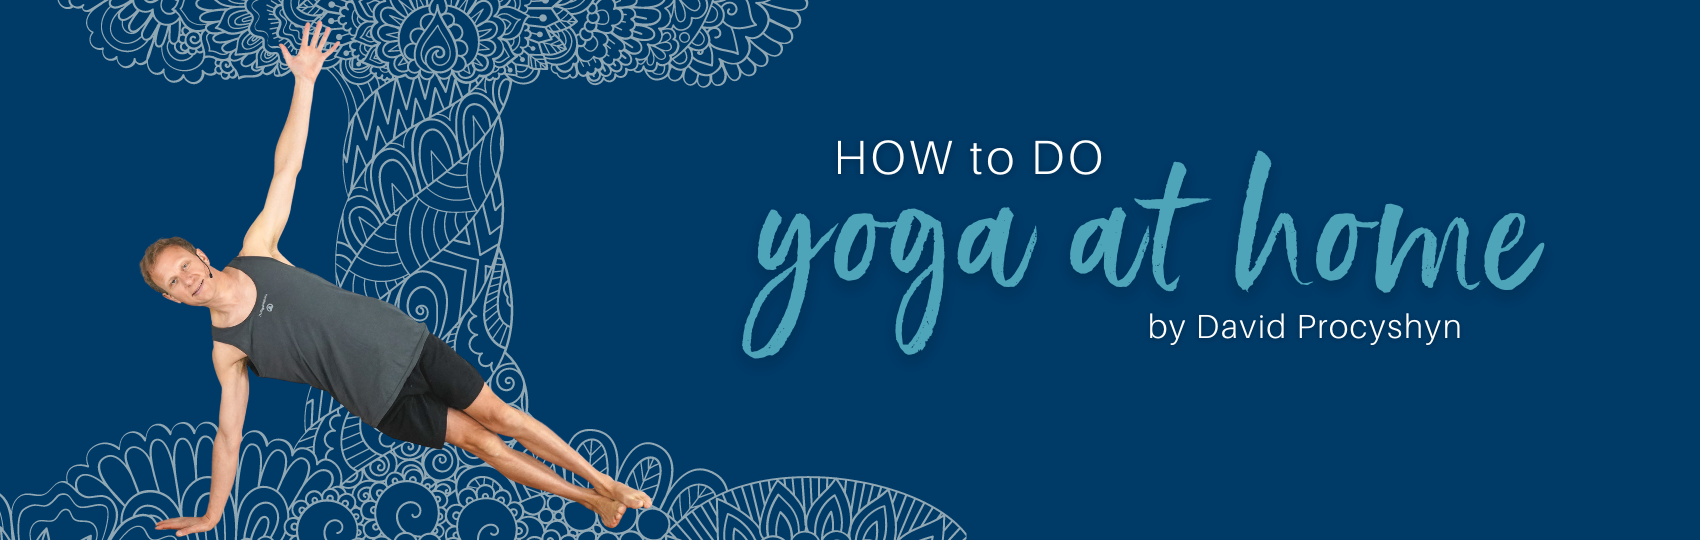 5 Steps to Doing Yoga at Home - A Simple Guide Banner